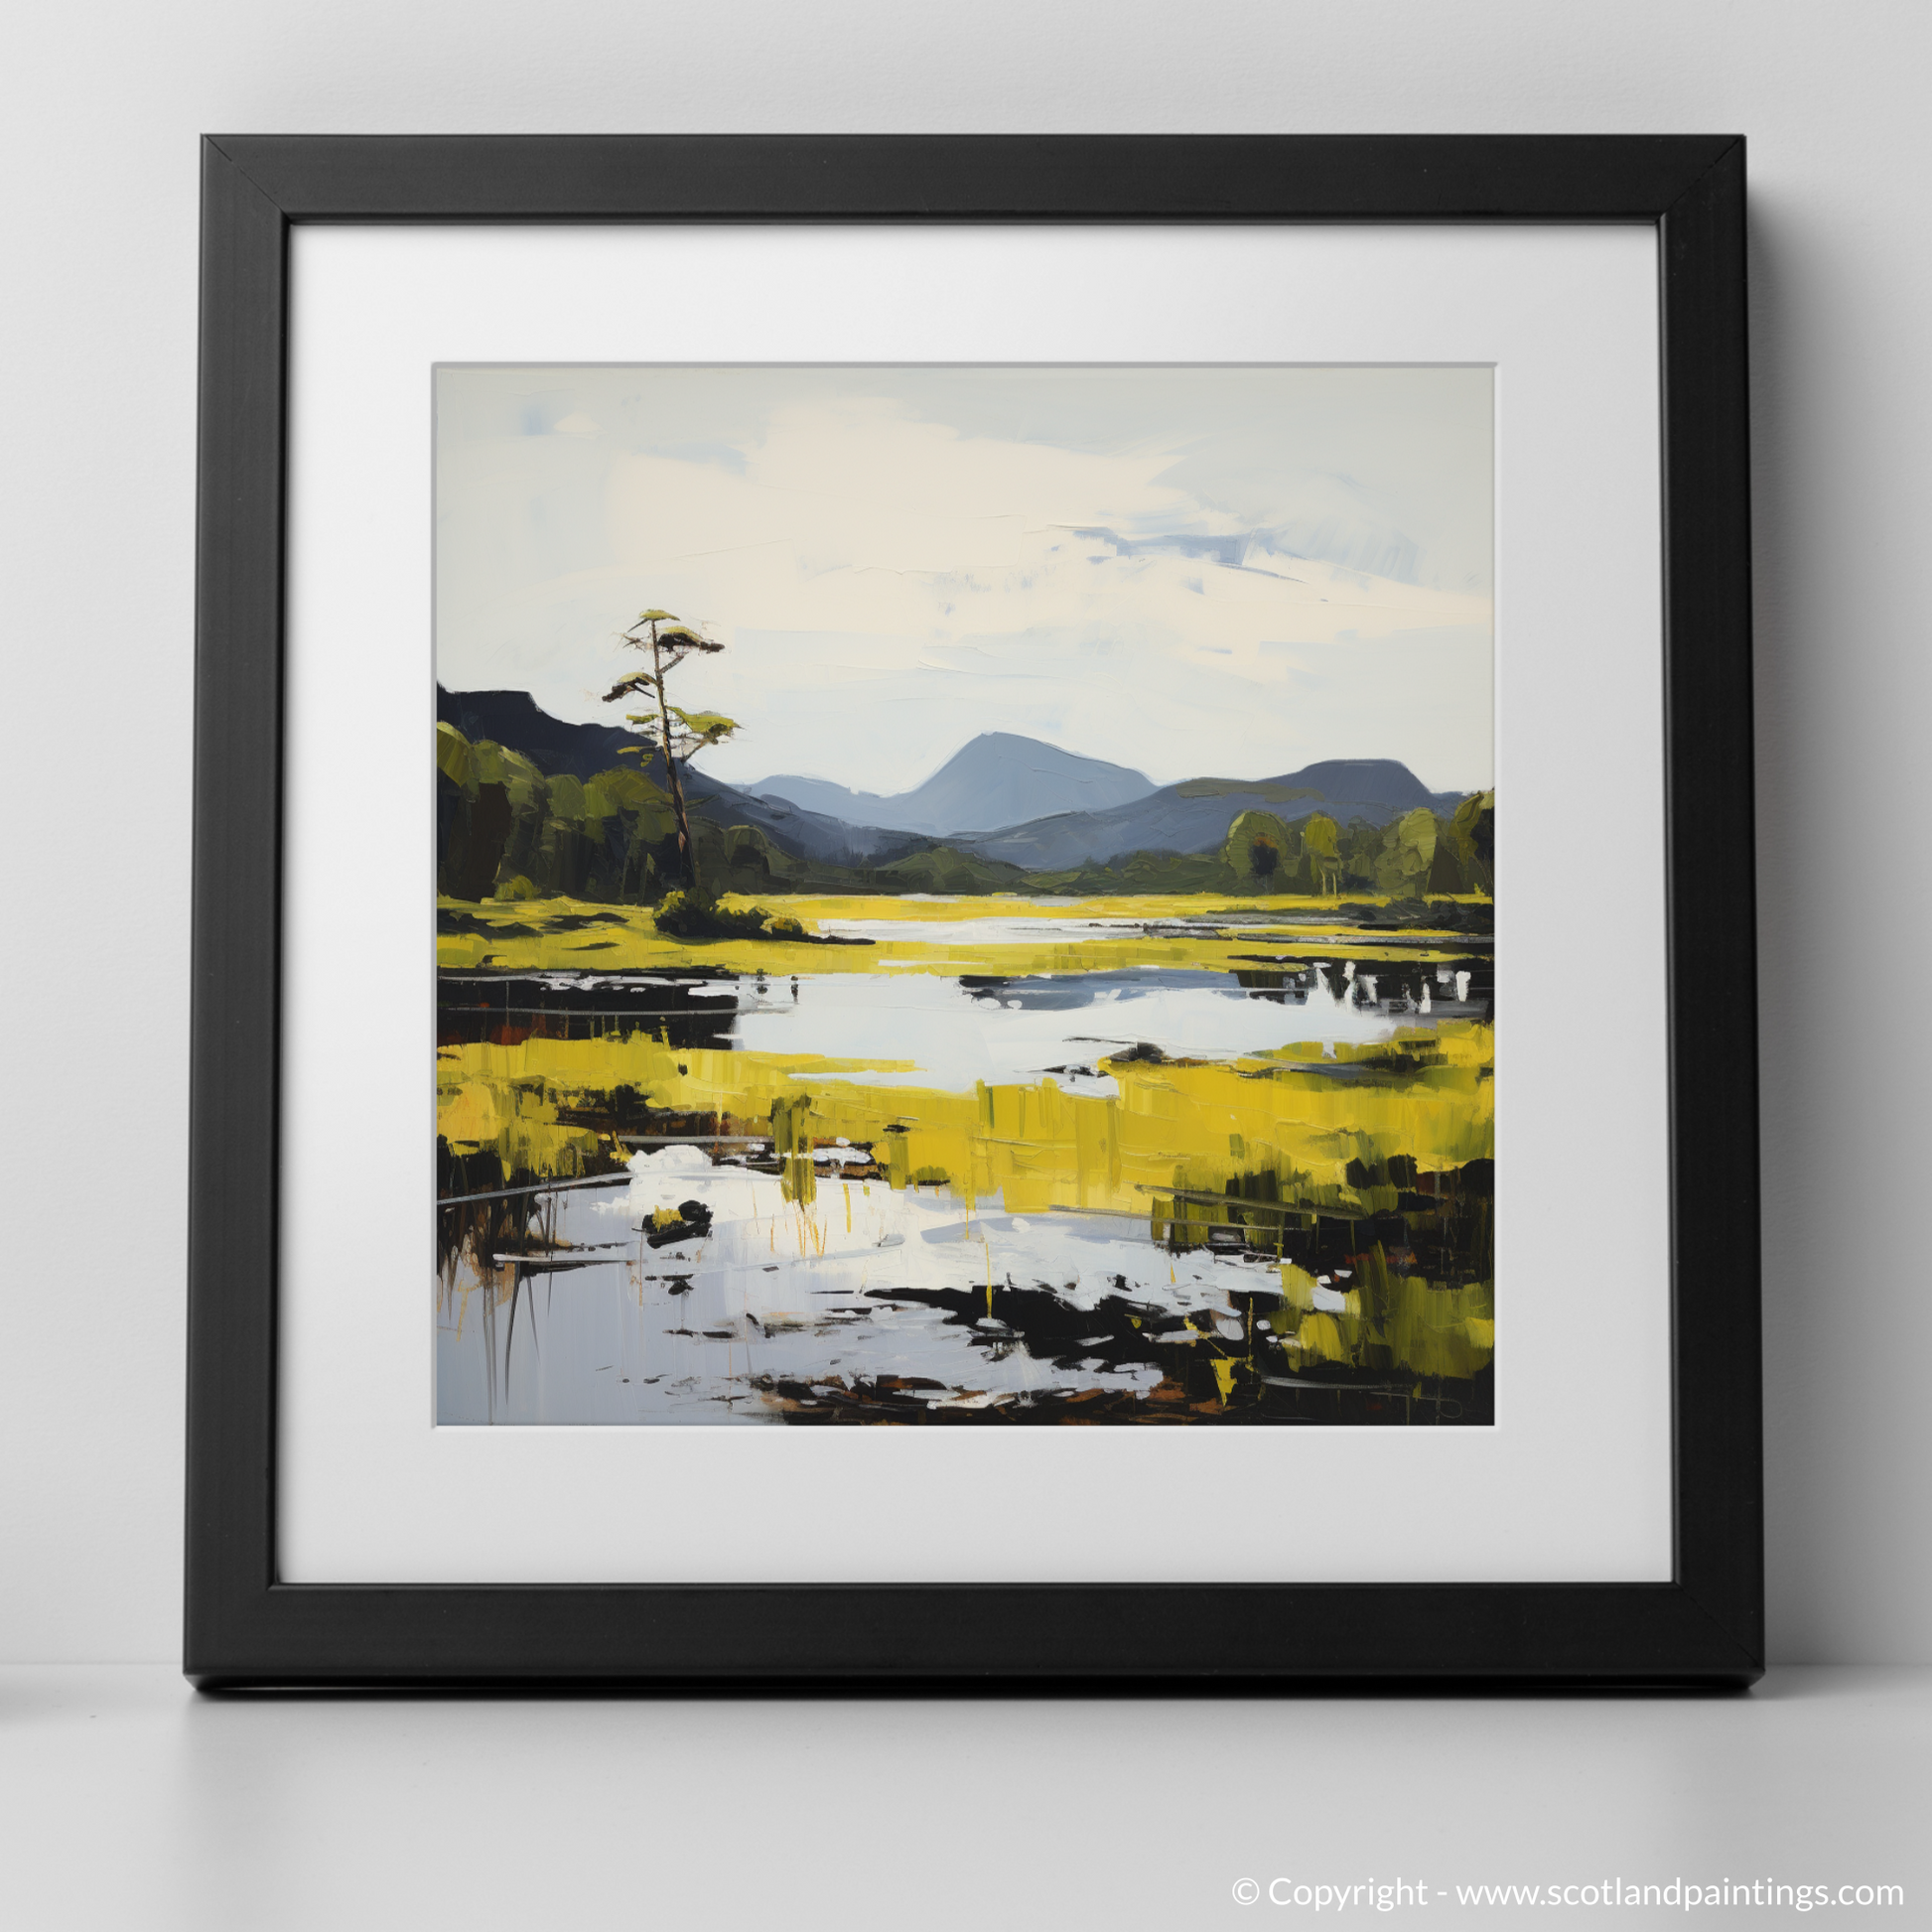 Art Print of Loch Ard, Stirling in summer with a black frame